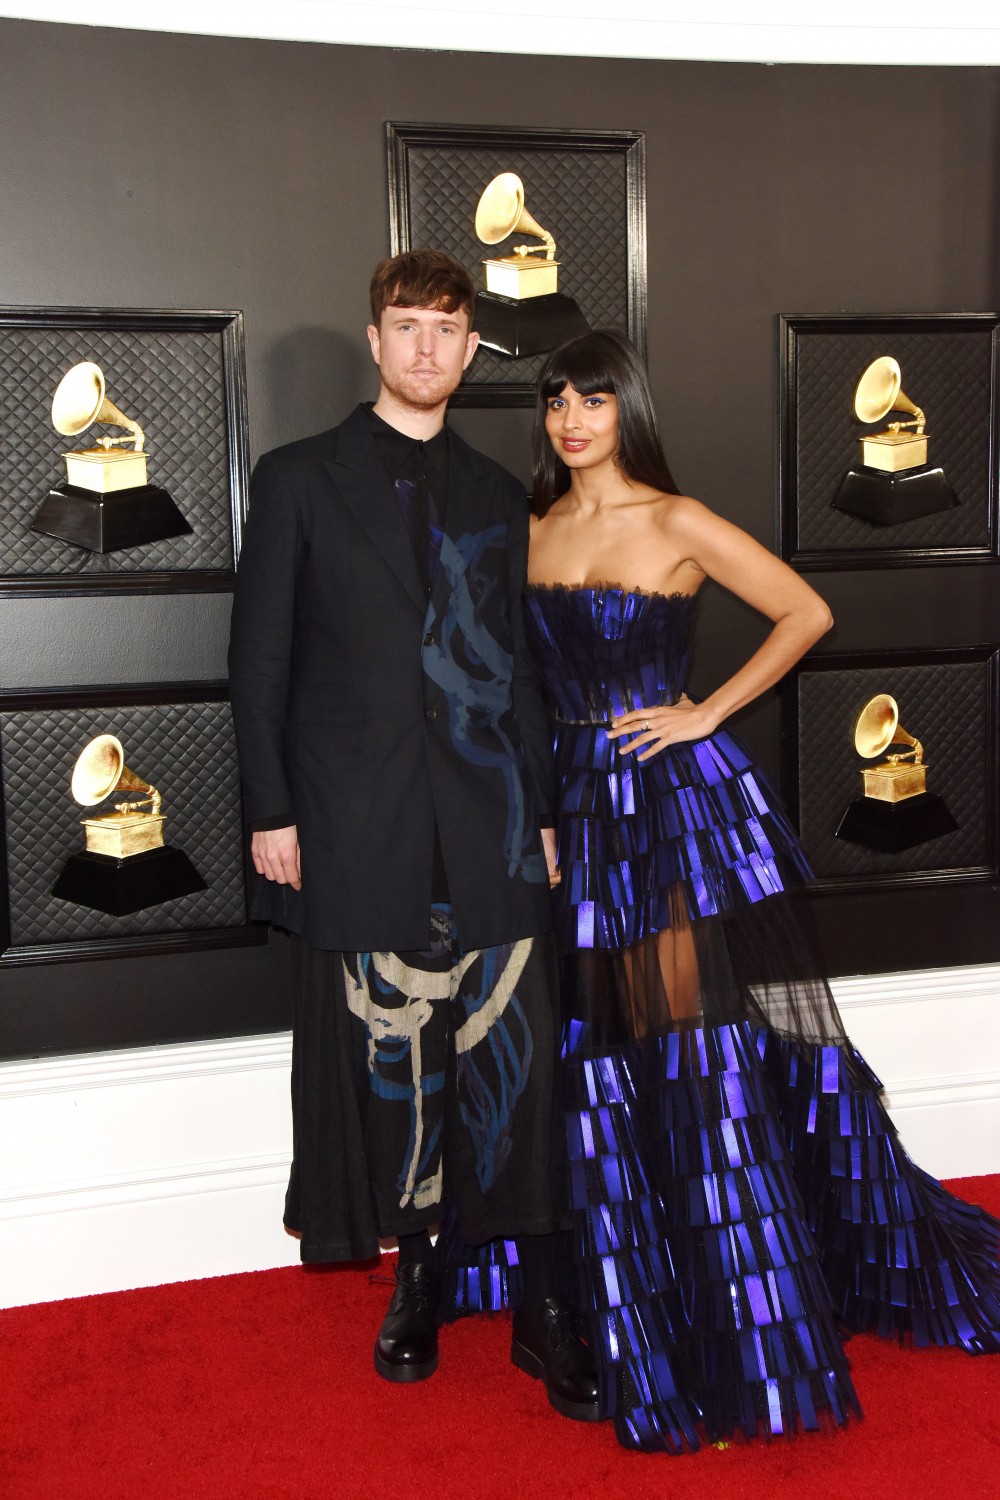 James Blake, Jameela Jamil arrives at the 62nd Annual GRAMMY Awards at Staples Center on January 26, 2020 in Los Angeles, California